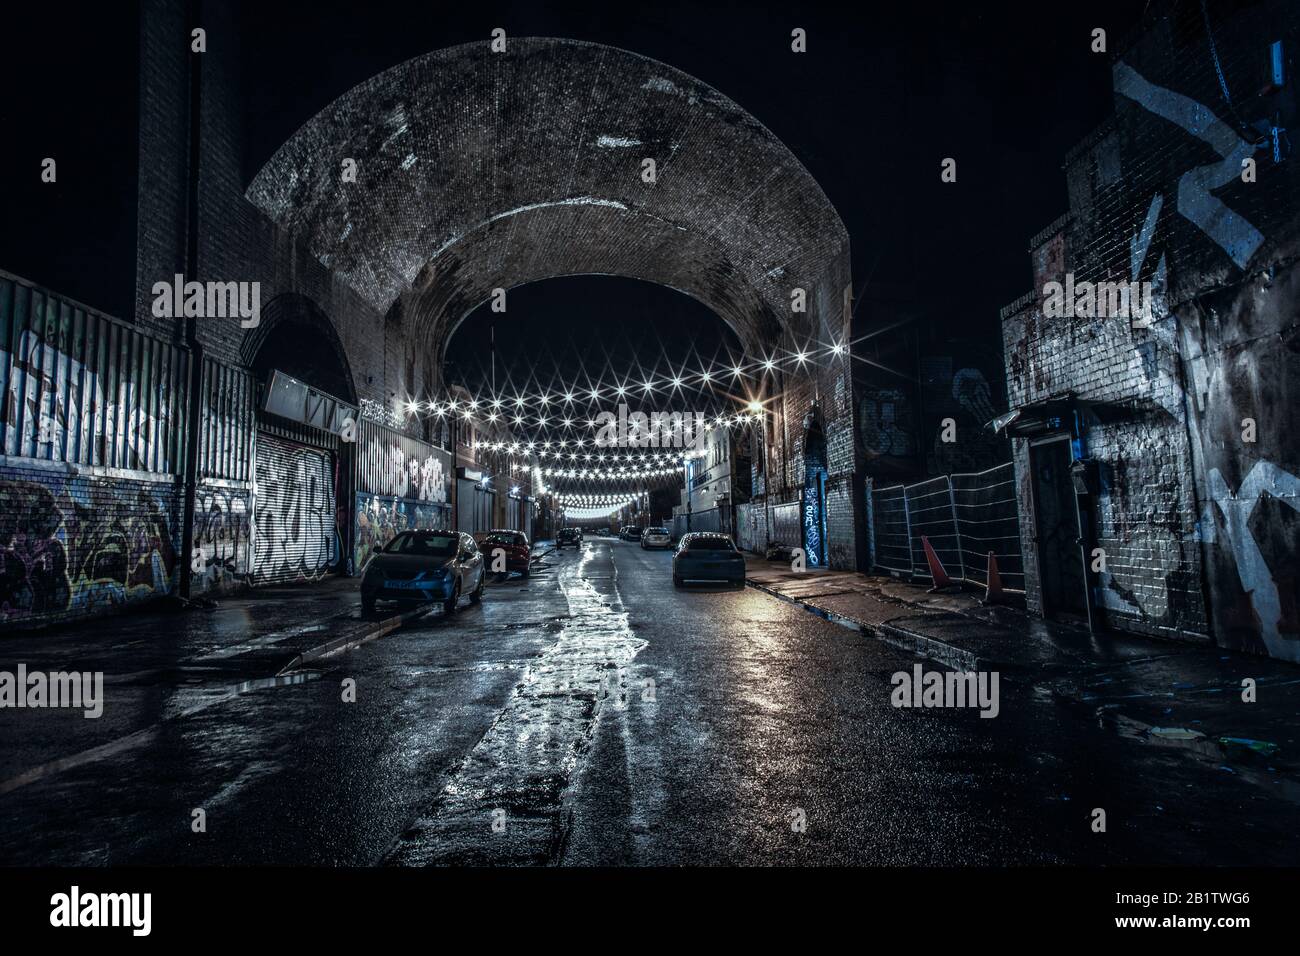 Digbeth in Birmingham, UK at night showing the original architectural detail and street art Stock Photo